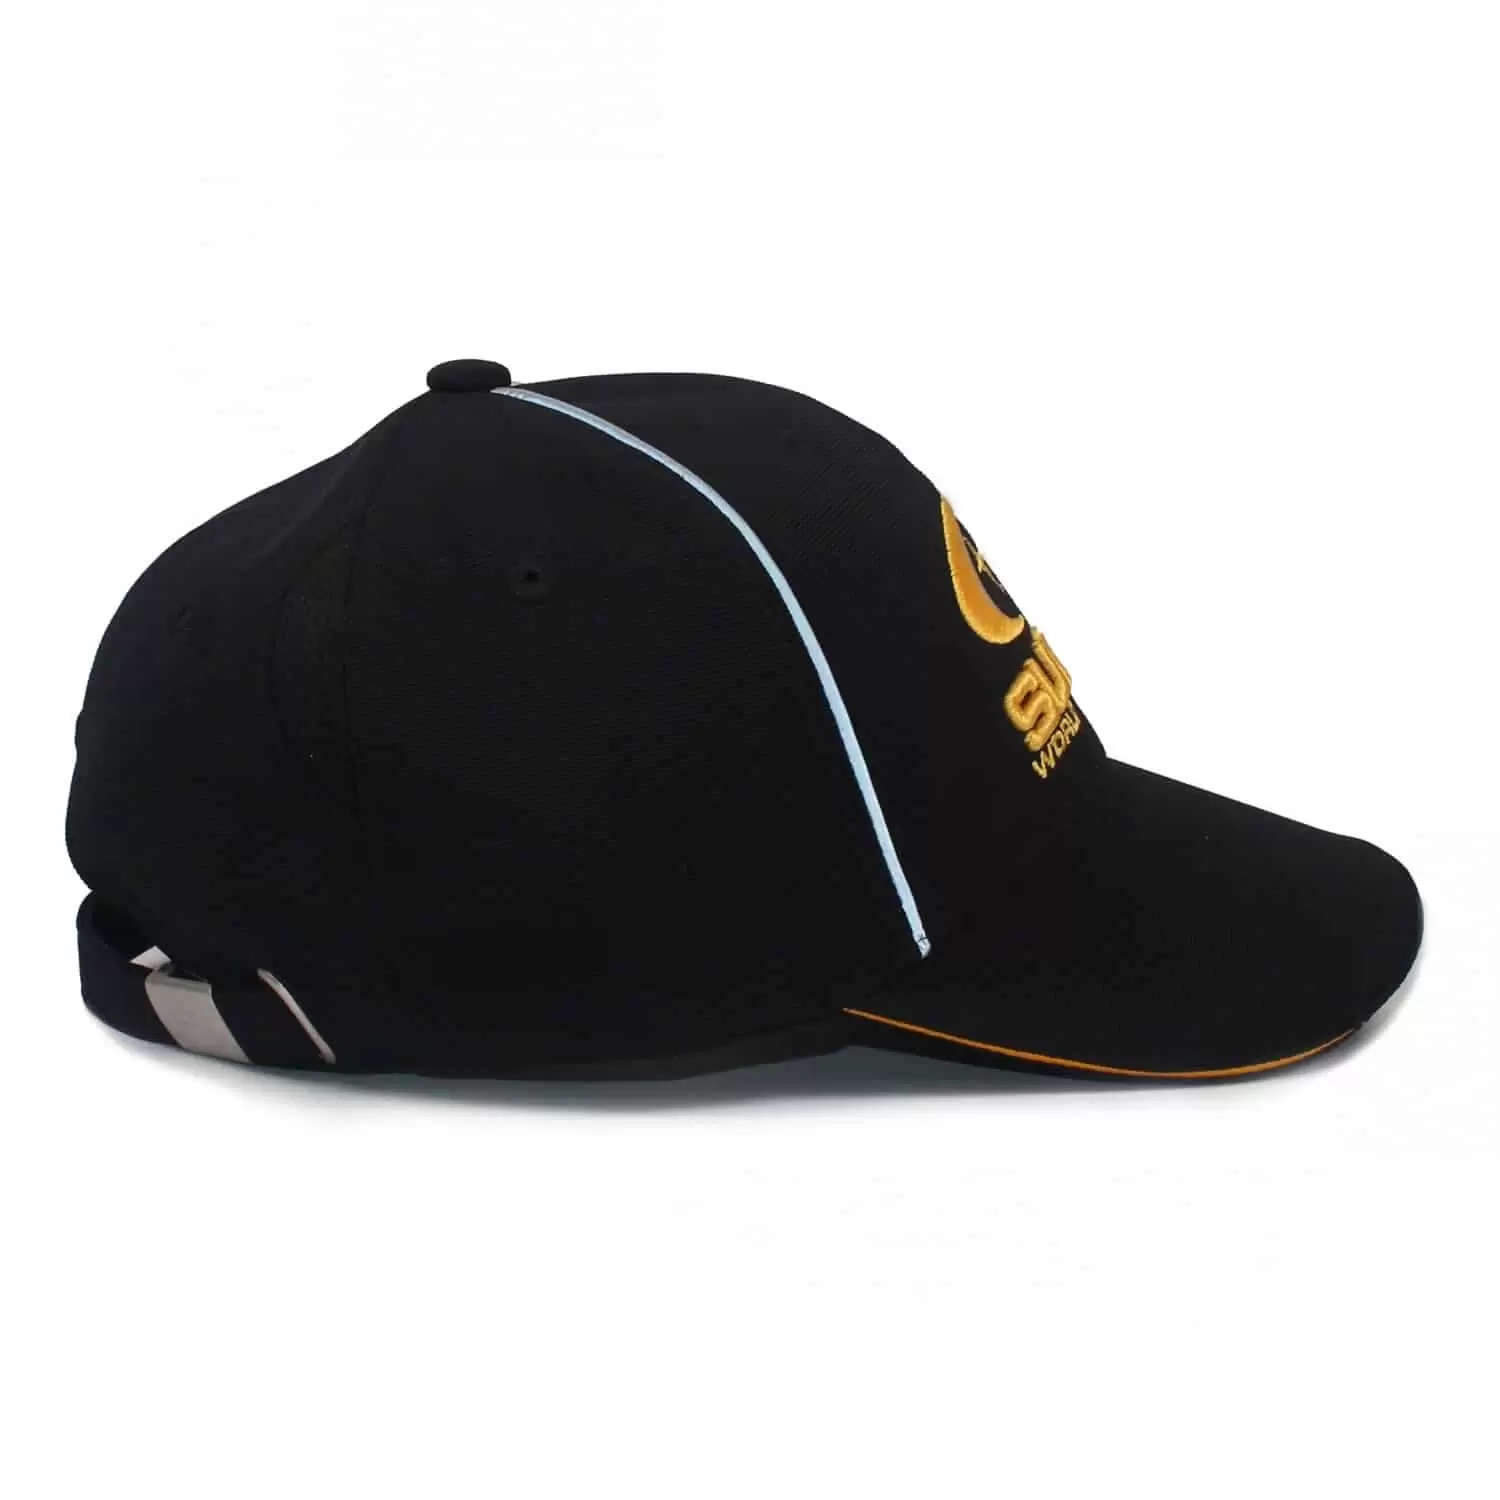 NICE quality custom fashion embroidered branded car logo event Comfortable baseball cap and hats